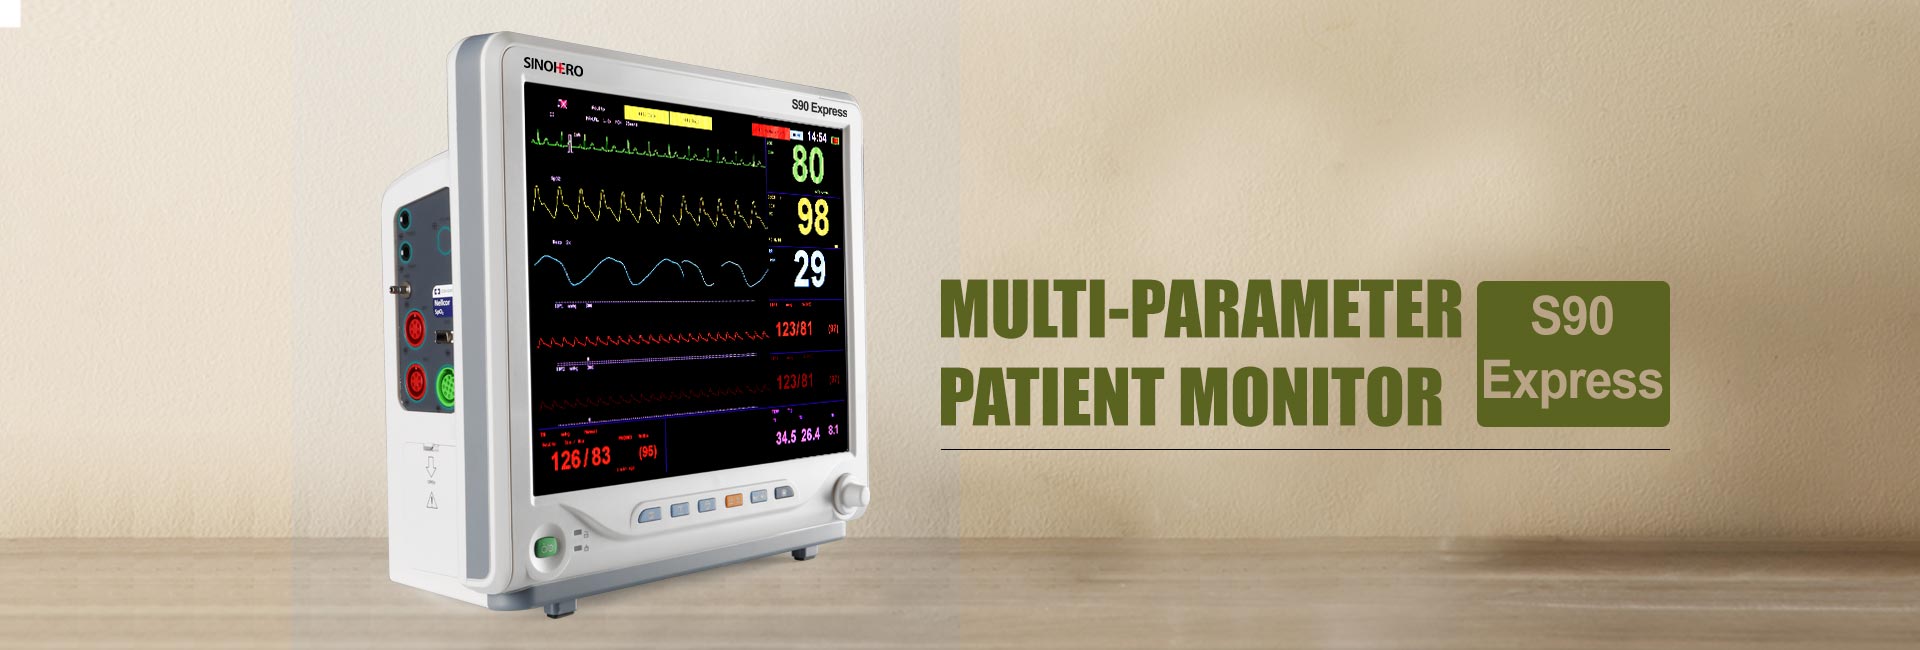 S90 Express 15 Patient Monitor(图3)